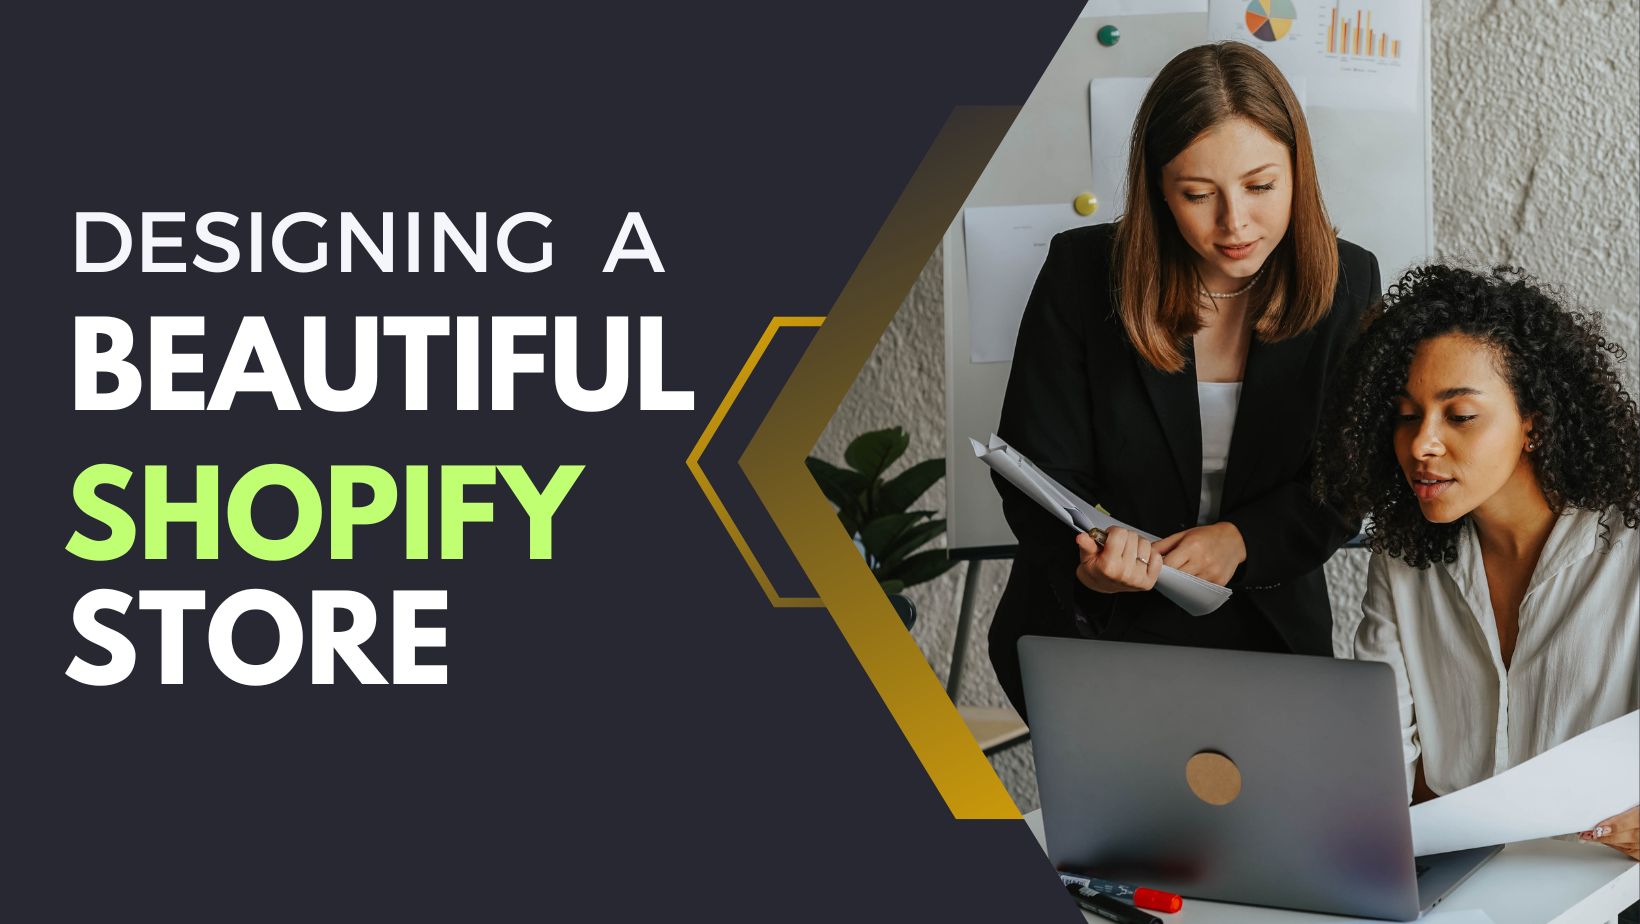 10 Essential Tips for Designing a Beautiful Shopify Store